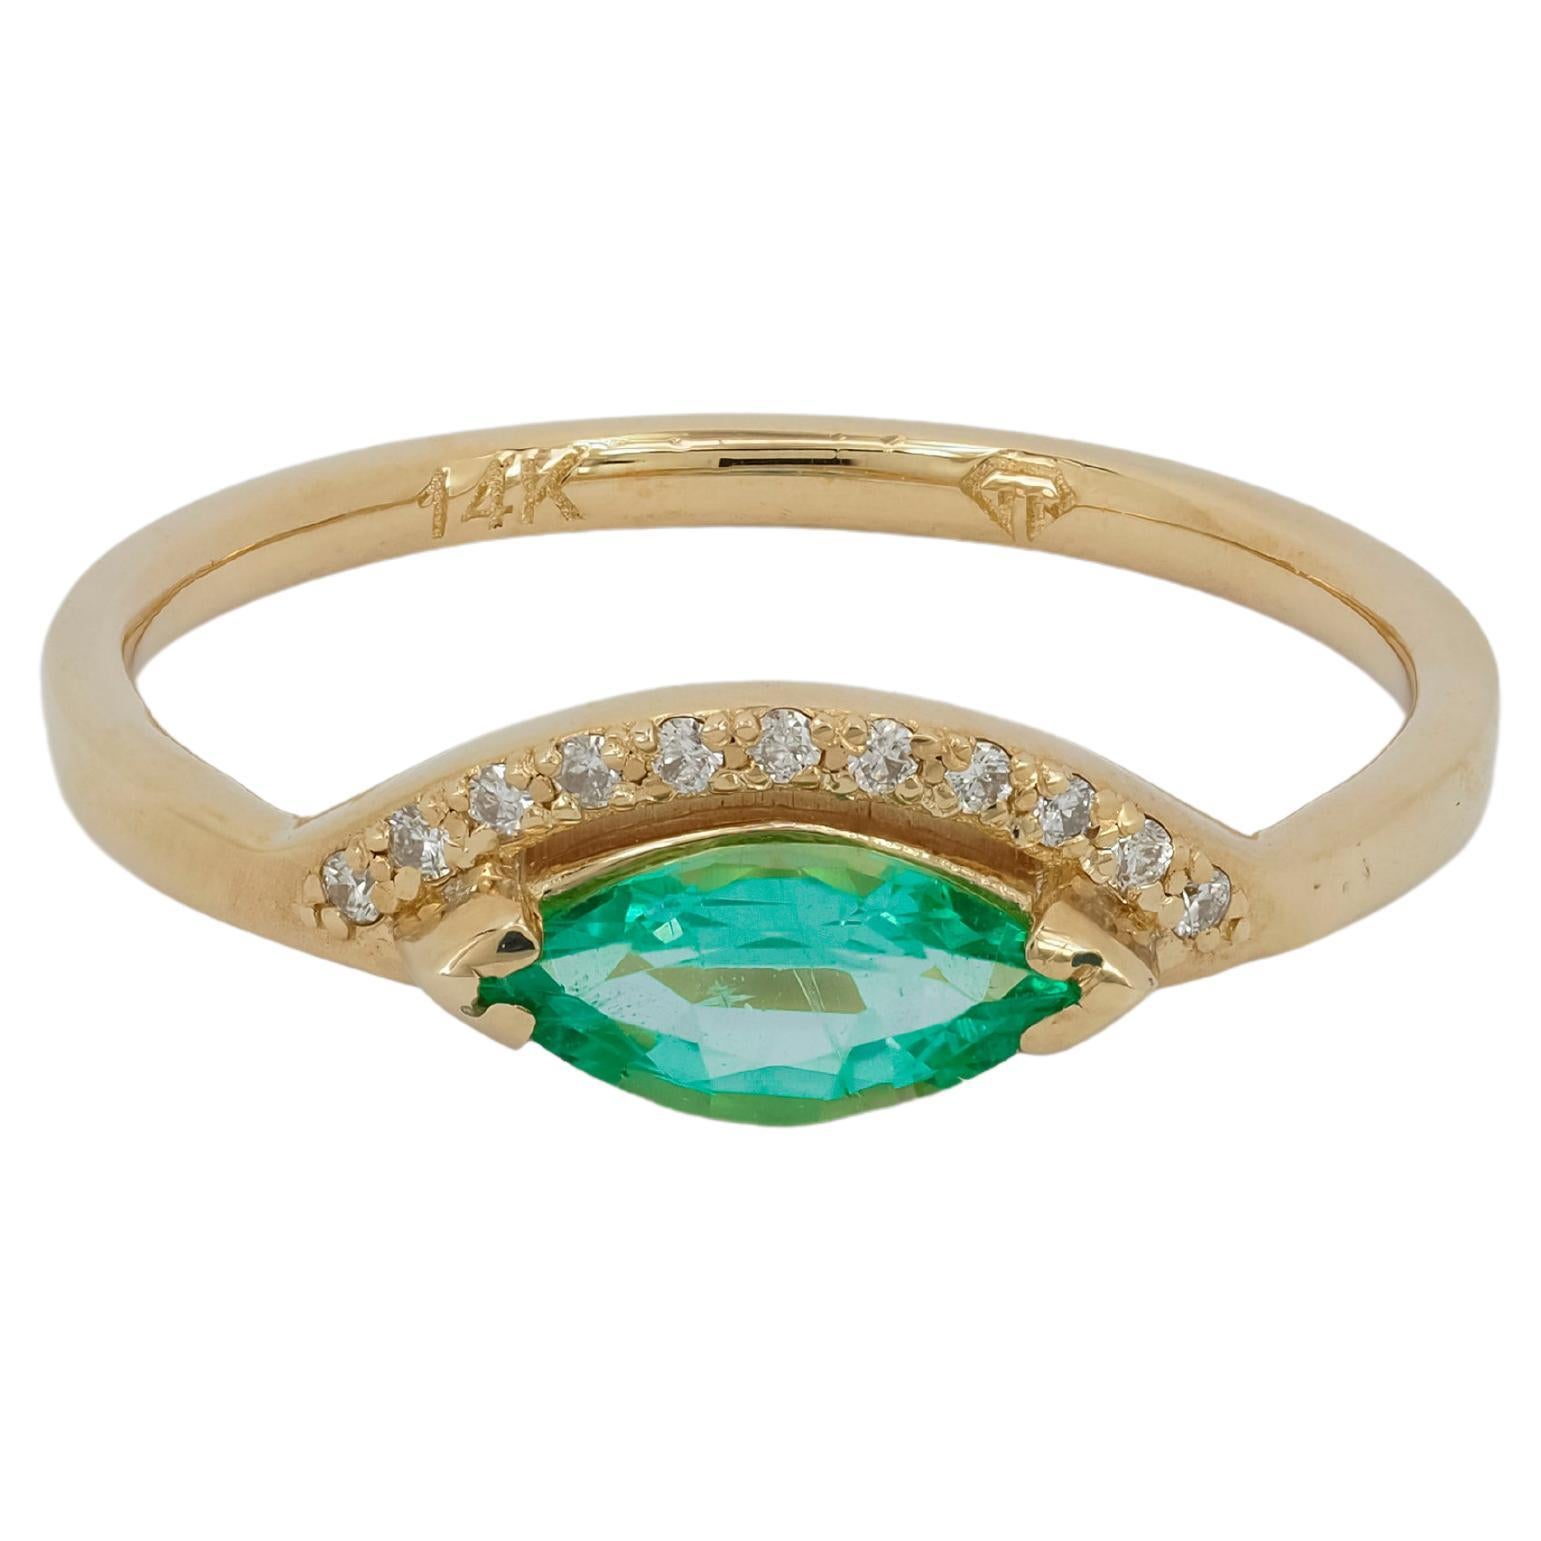 For Sale:  14 K Gold Ring with Marquise Cut Emerald and Diamonds